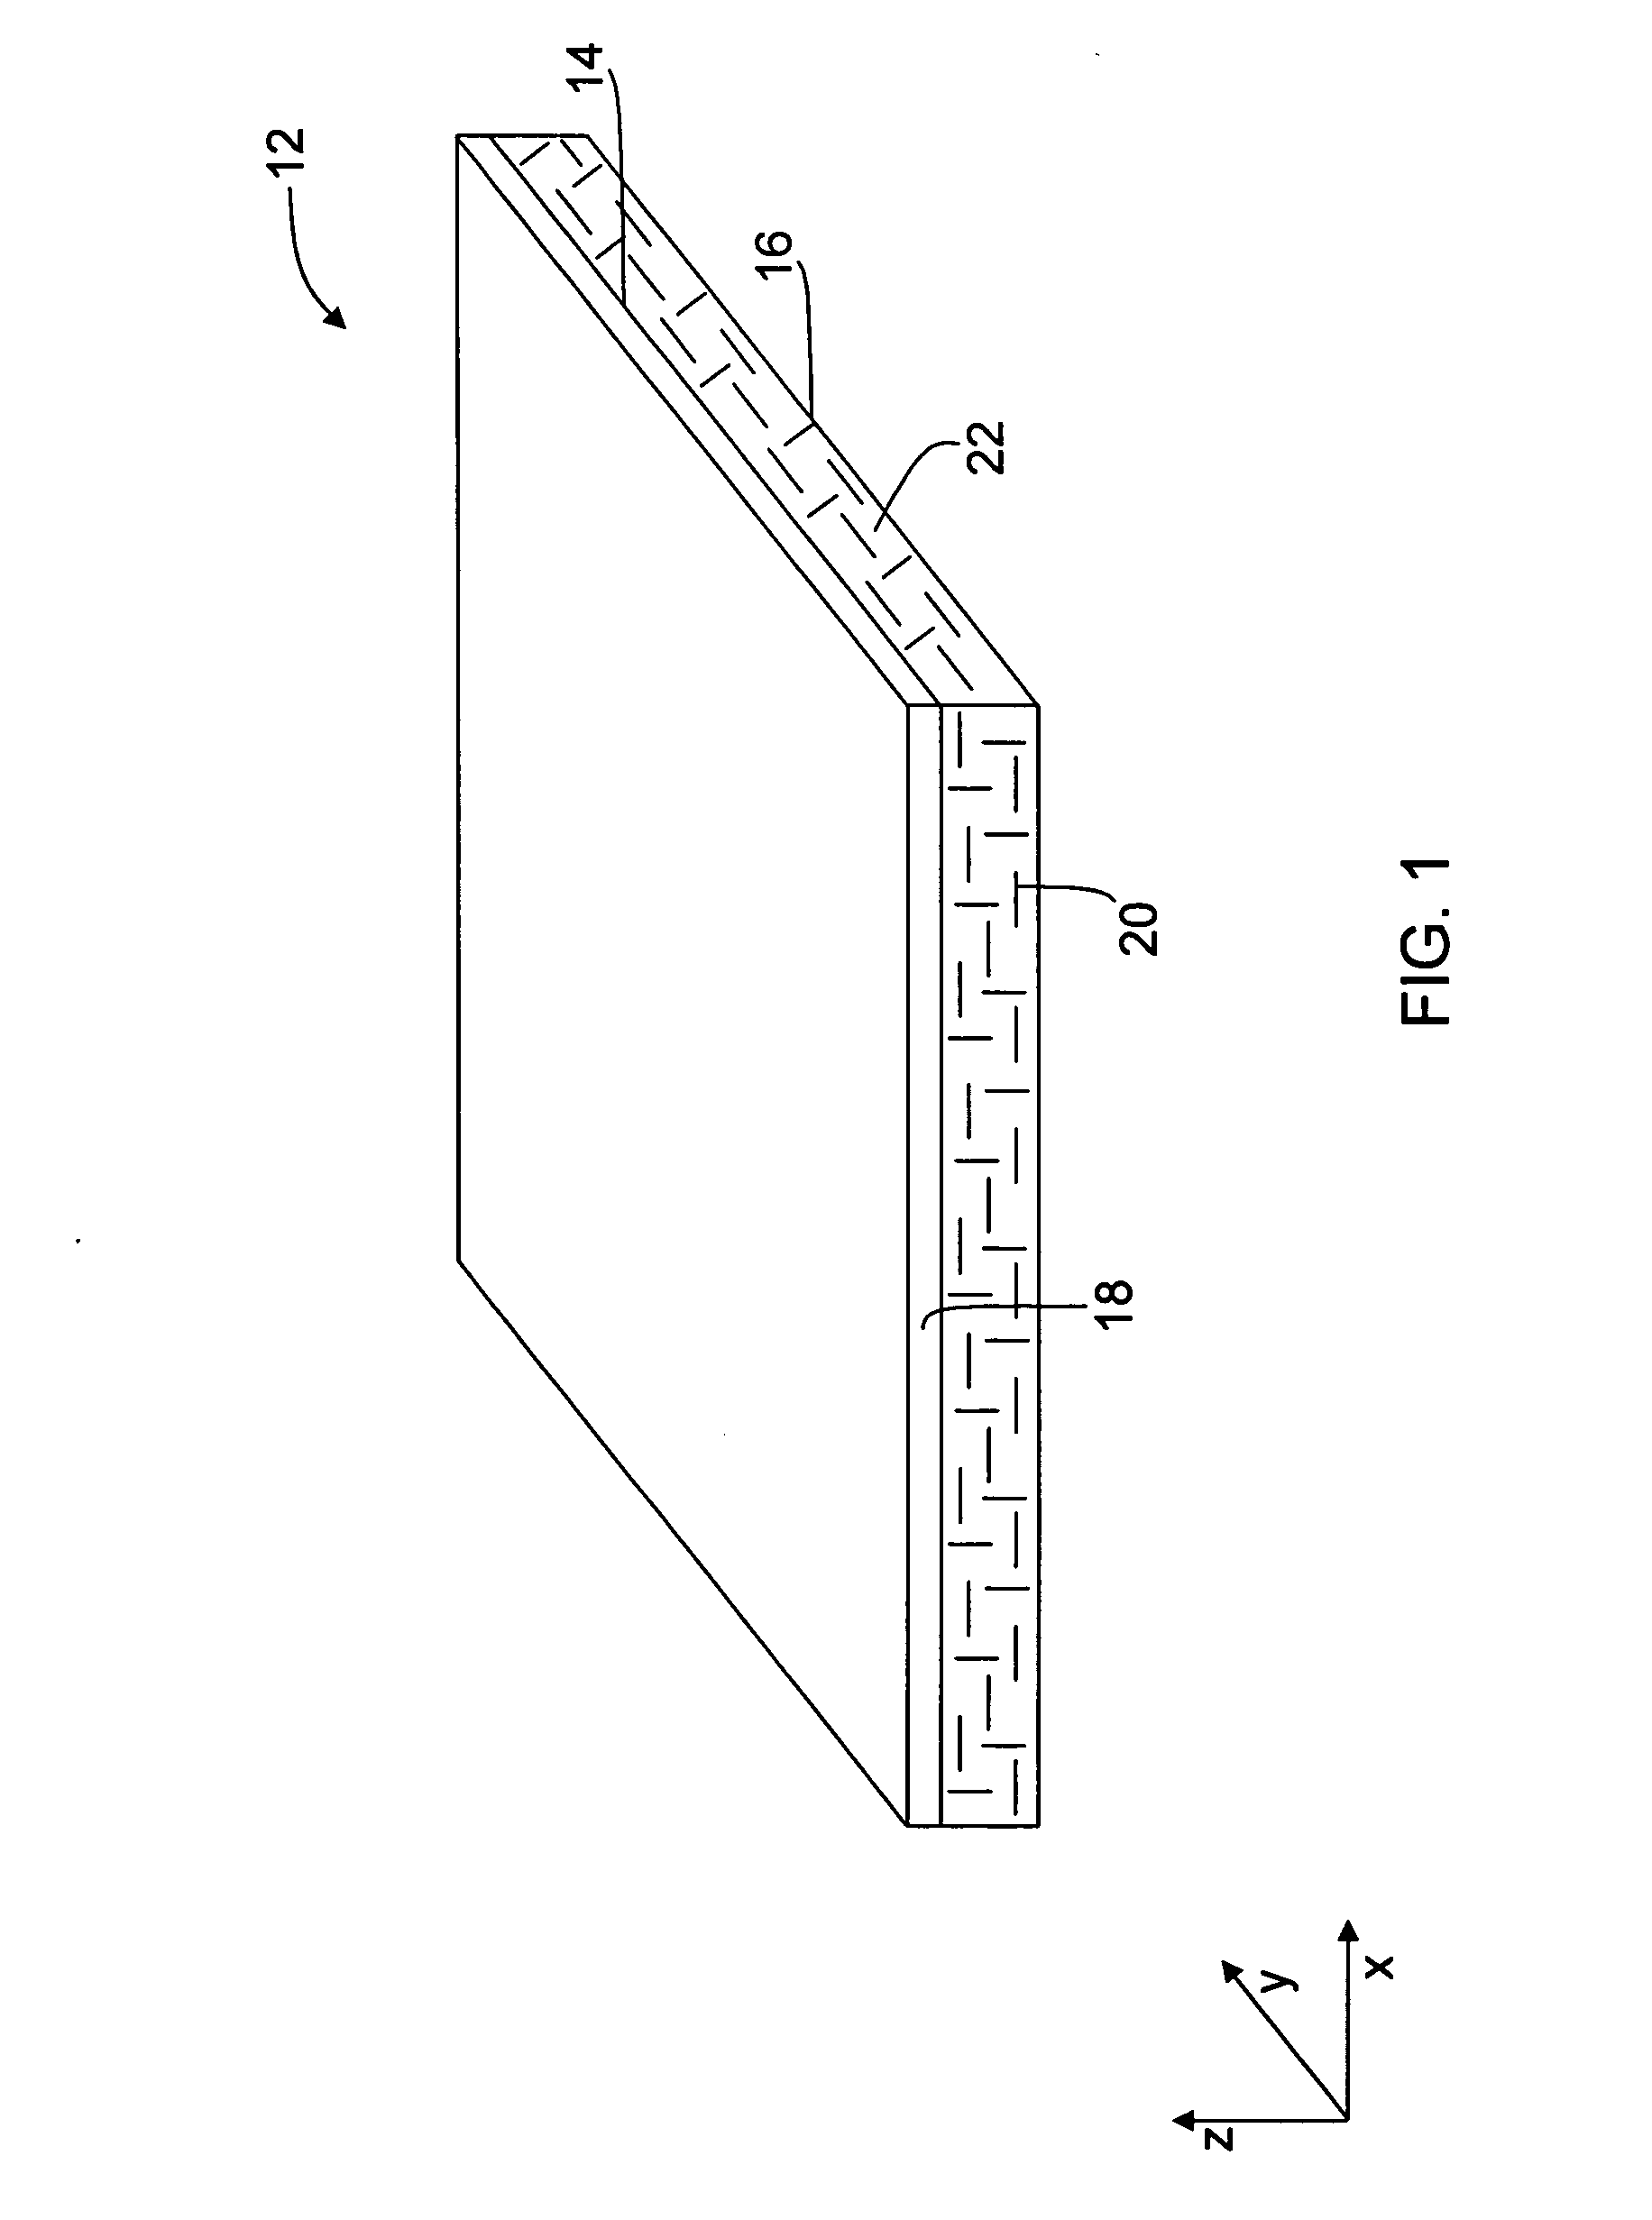 Method of increasing loft in a porous fiber reinforced thermoplastic sheet